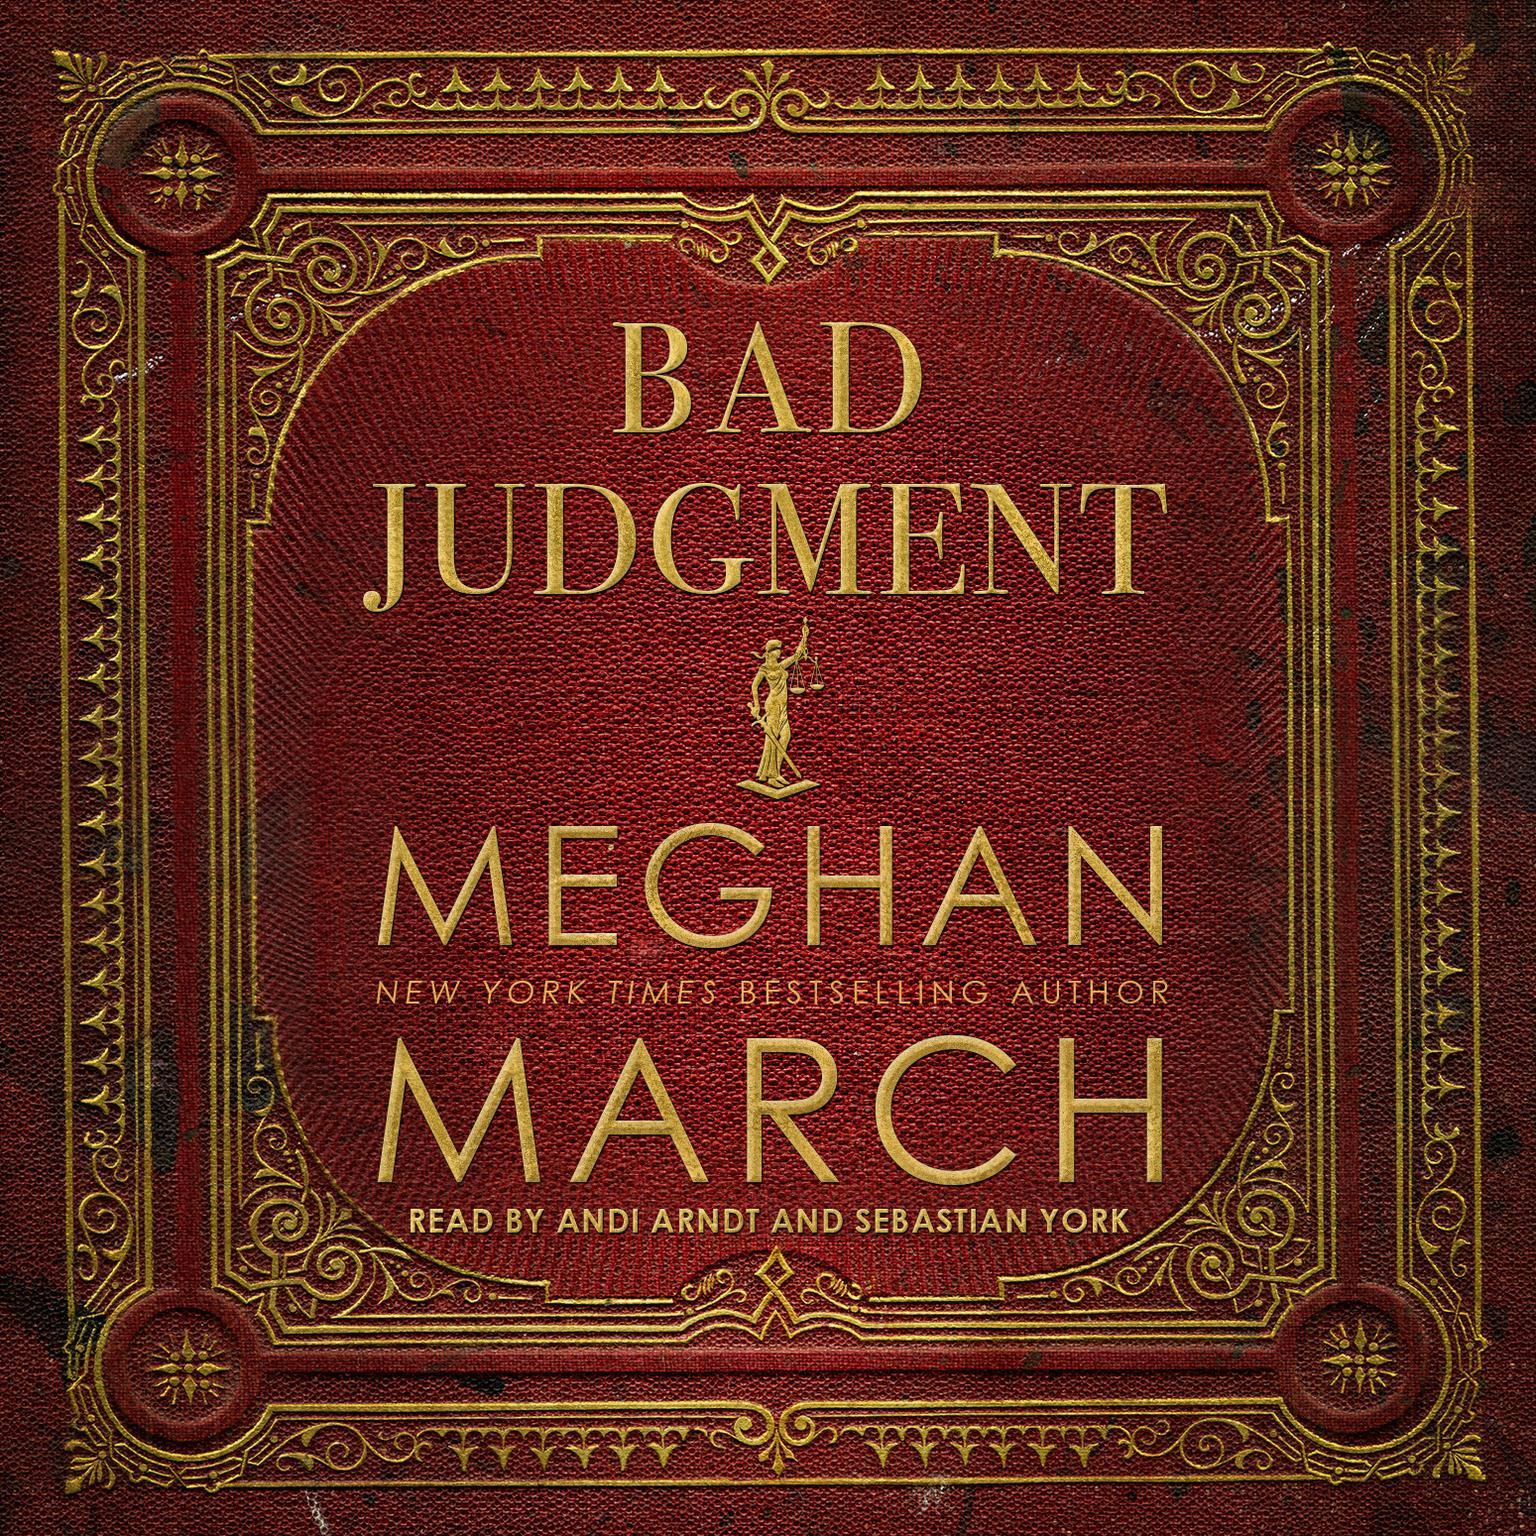 Bad Judgment Audiobook, by Meghan March